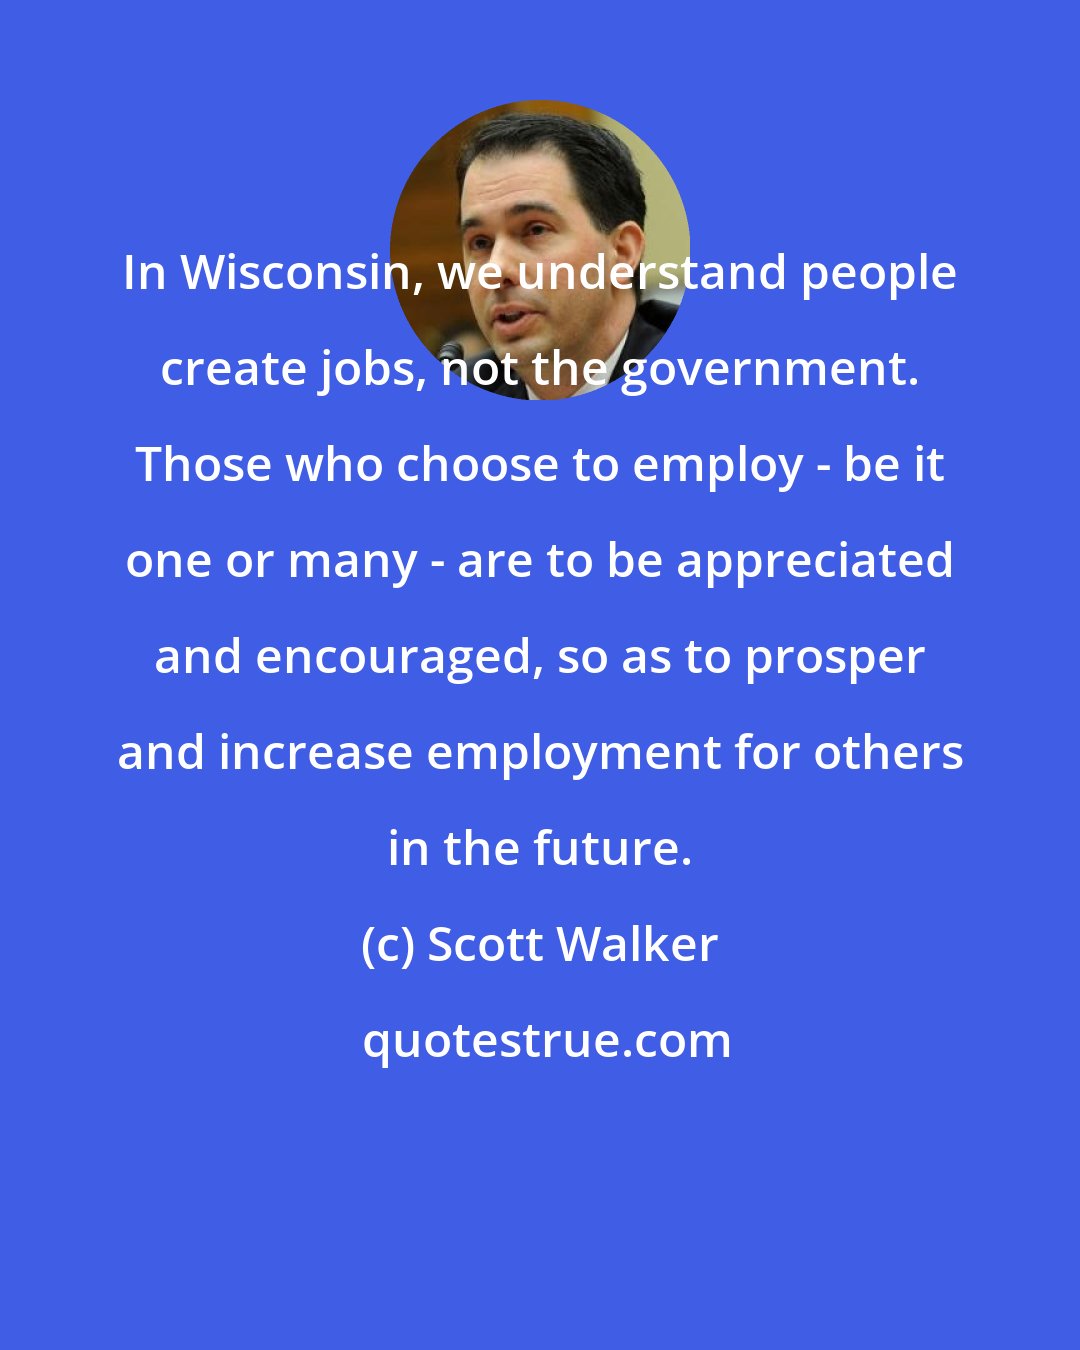 Scott Walker: In Wisconsin, we understand people create jobs, not the government. Those who choose to employ - be it one or many - are to be appreciated and encouraged, so as to prosper and increase employment for others in the future.